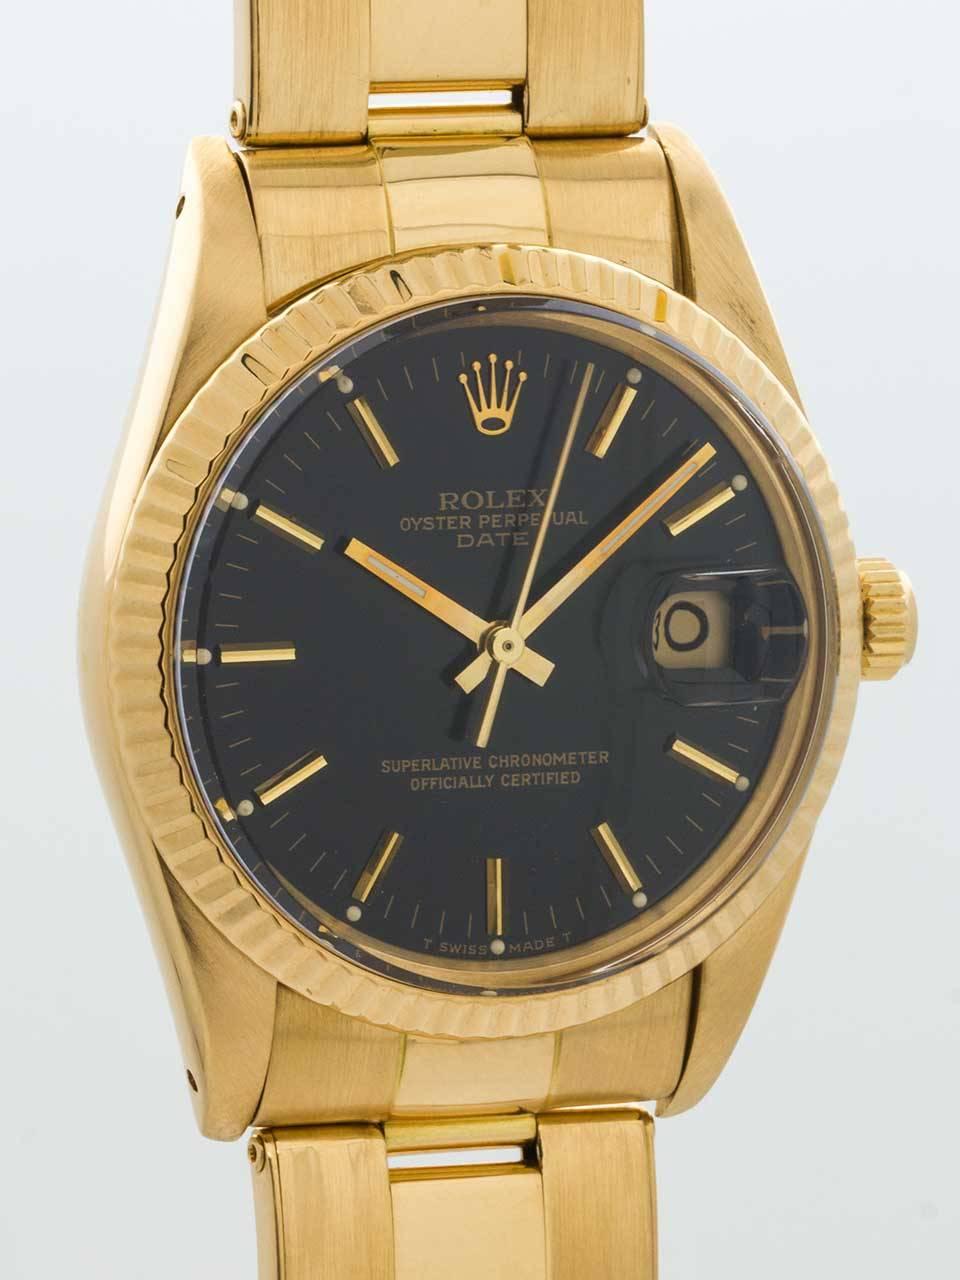 Rolex 18K Yellow Gold Oyster Perpetual Date Wristwatch ref 15038 serial number 9.8 million circa 1985. 34mm diameter man’s model with fluted bezel and acrylic crystal. Original black gloss dial with applied gold indexes and gilt baton hands. Powered